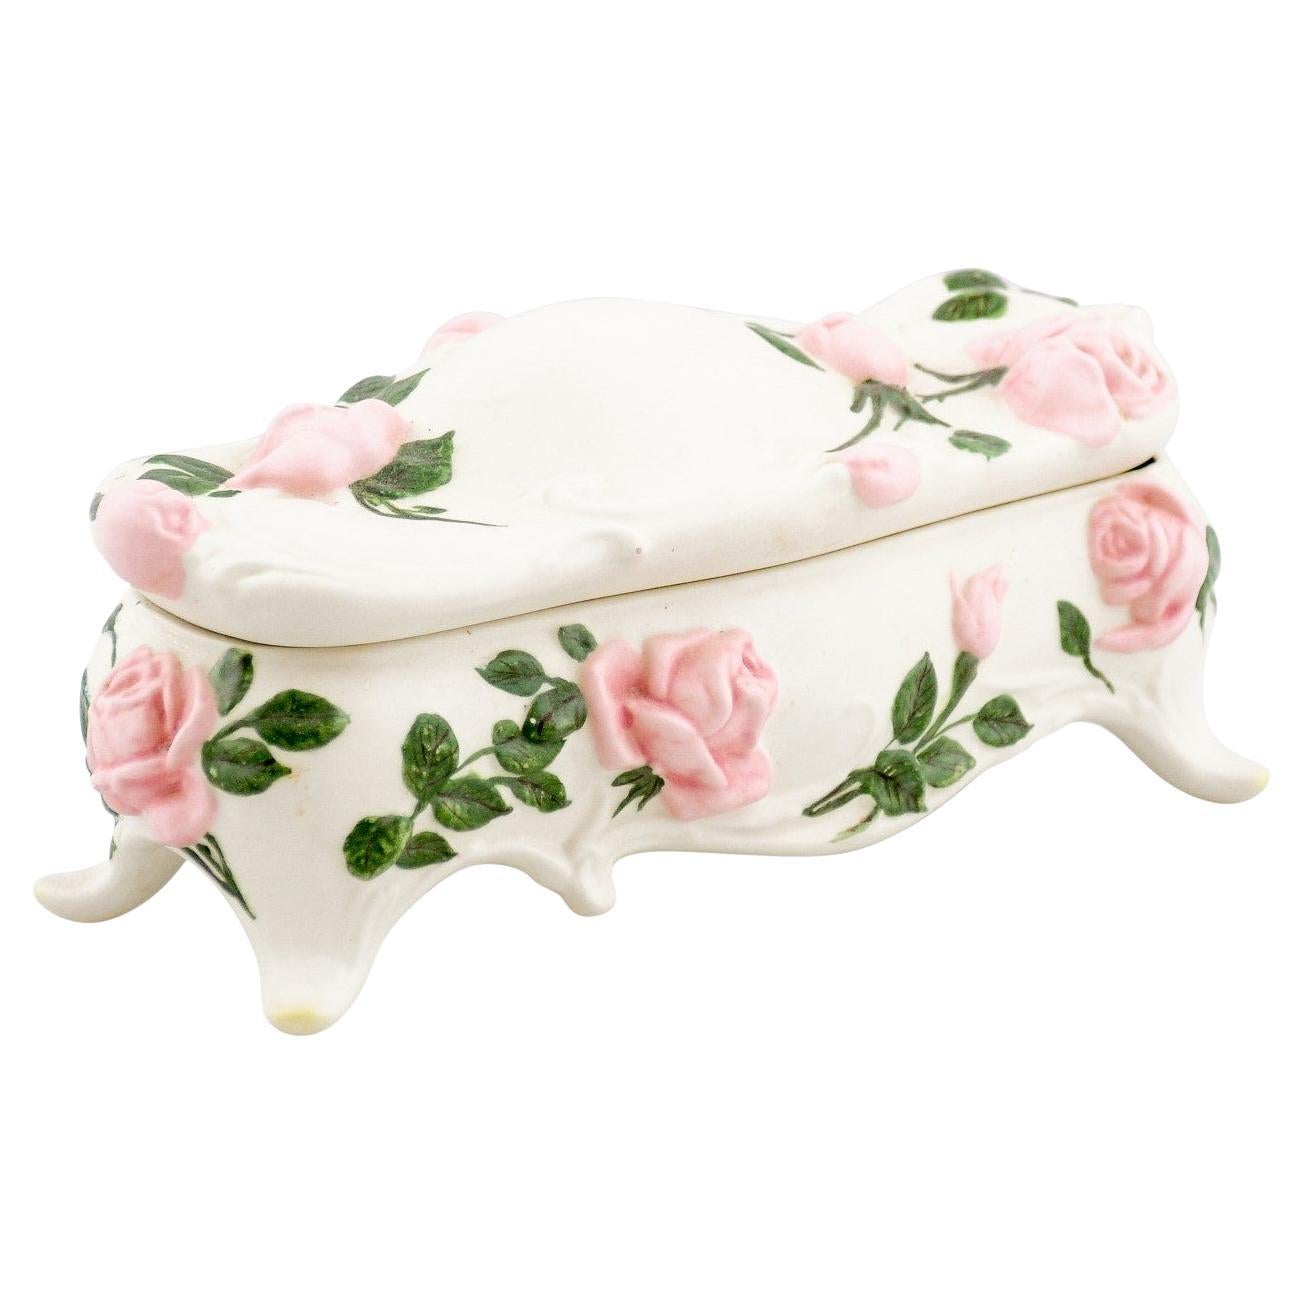 English Porcelain Vanity Lidded Box with Pink Painted Roses and Scrolling Feet